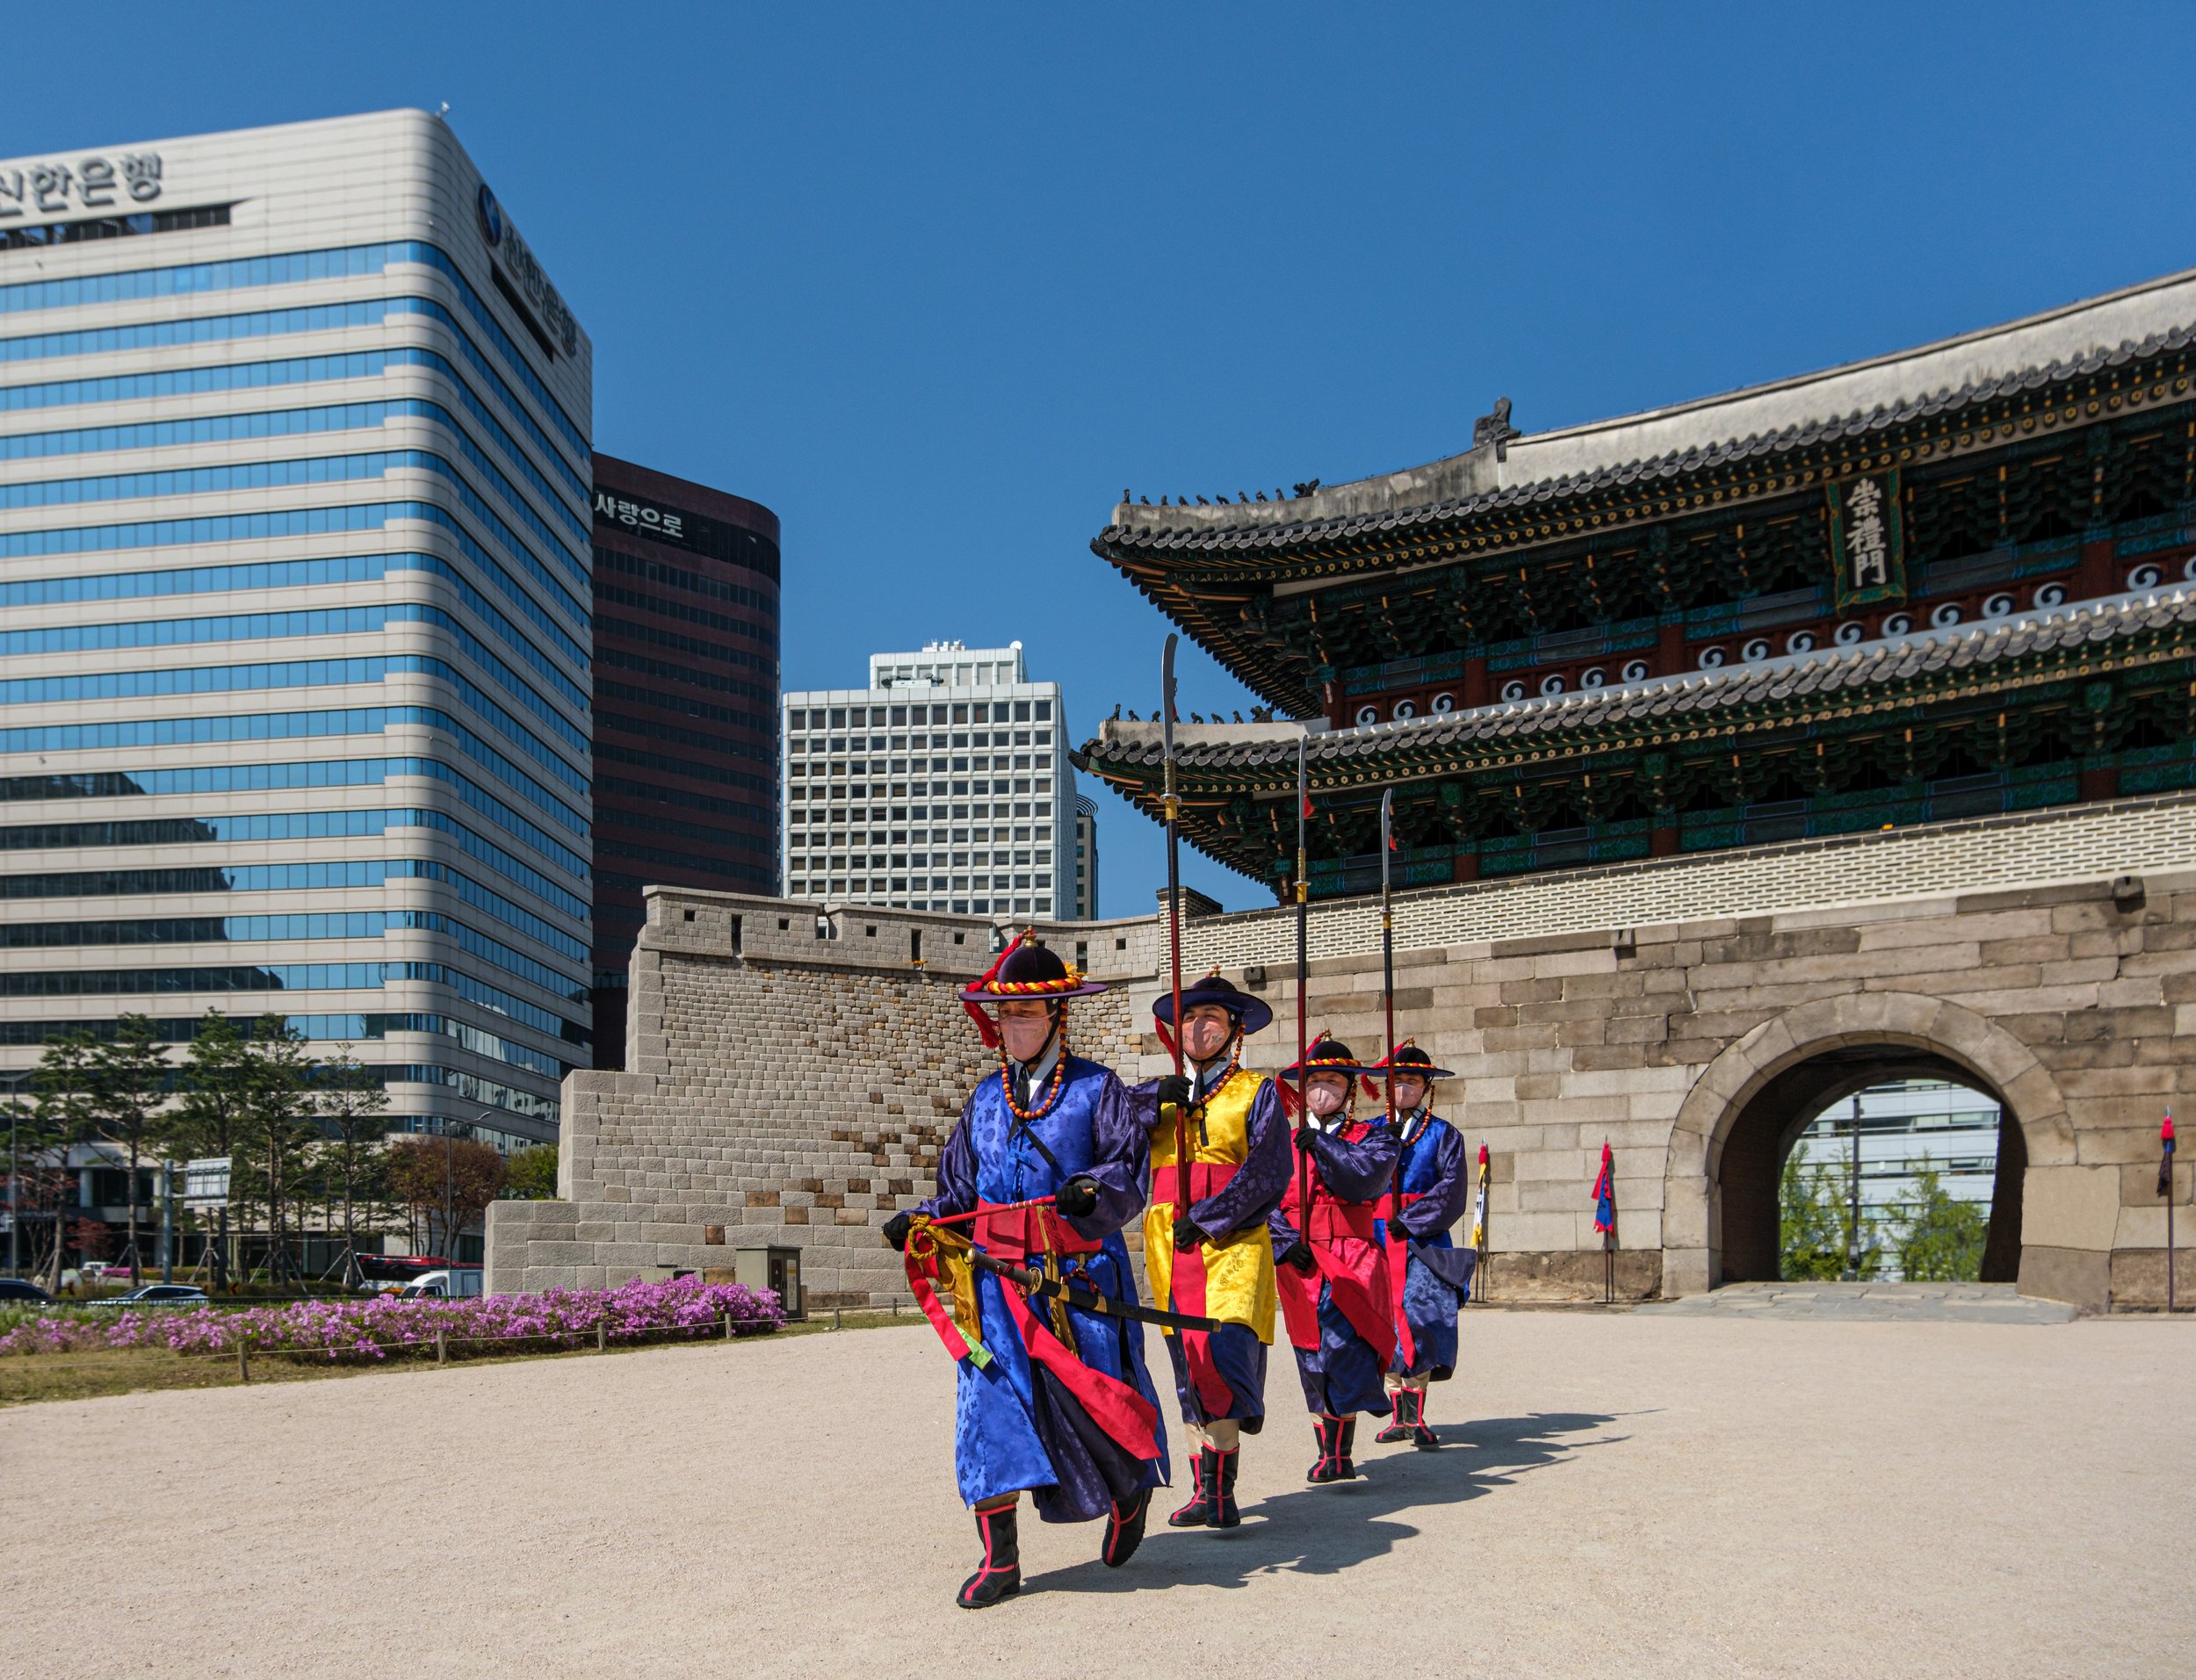 "Old Meets New", guards at Sungnyenum gate